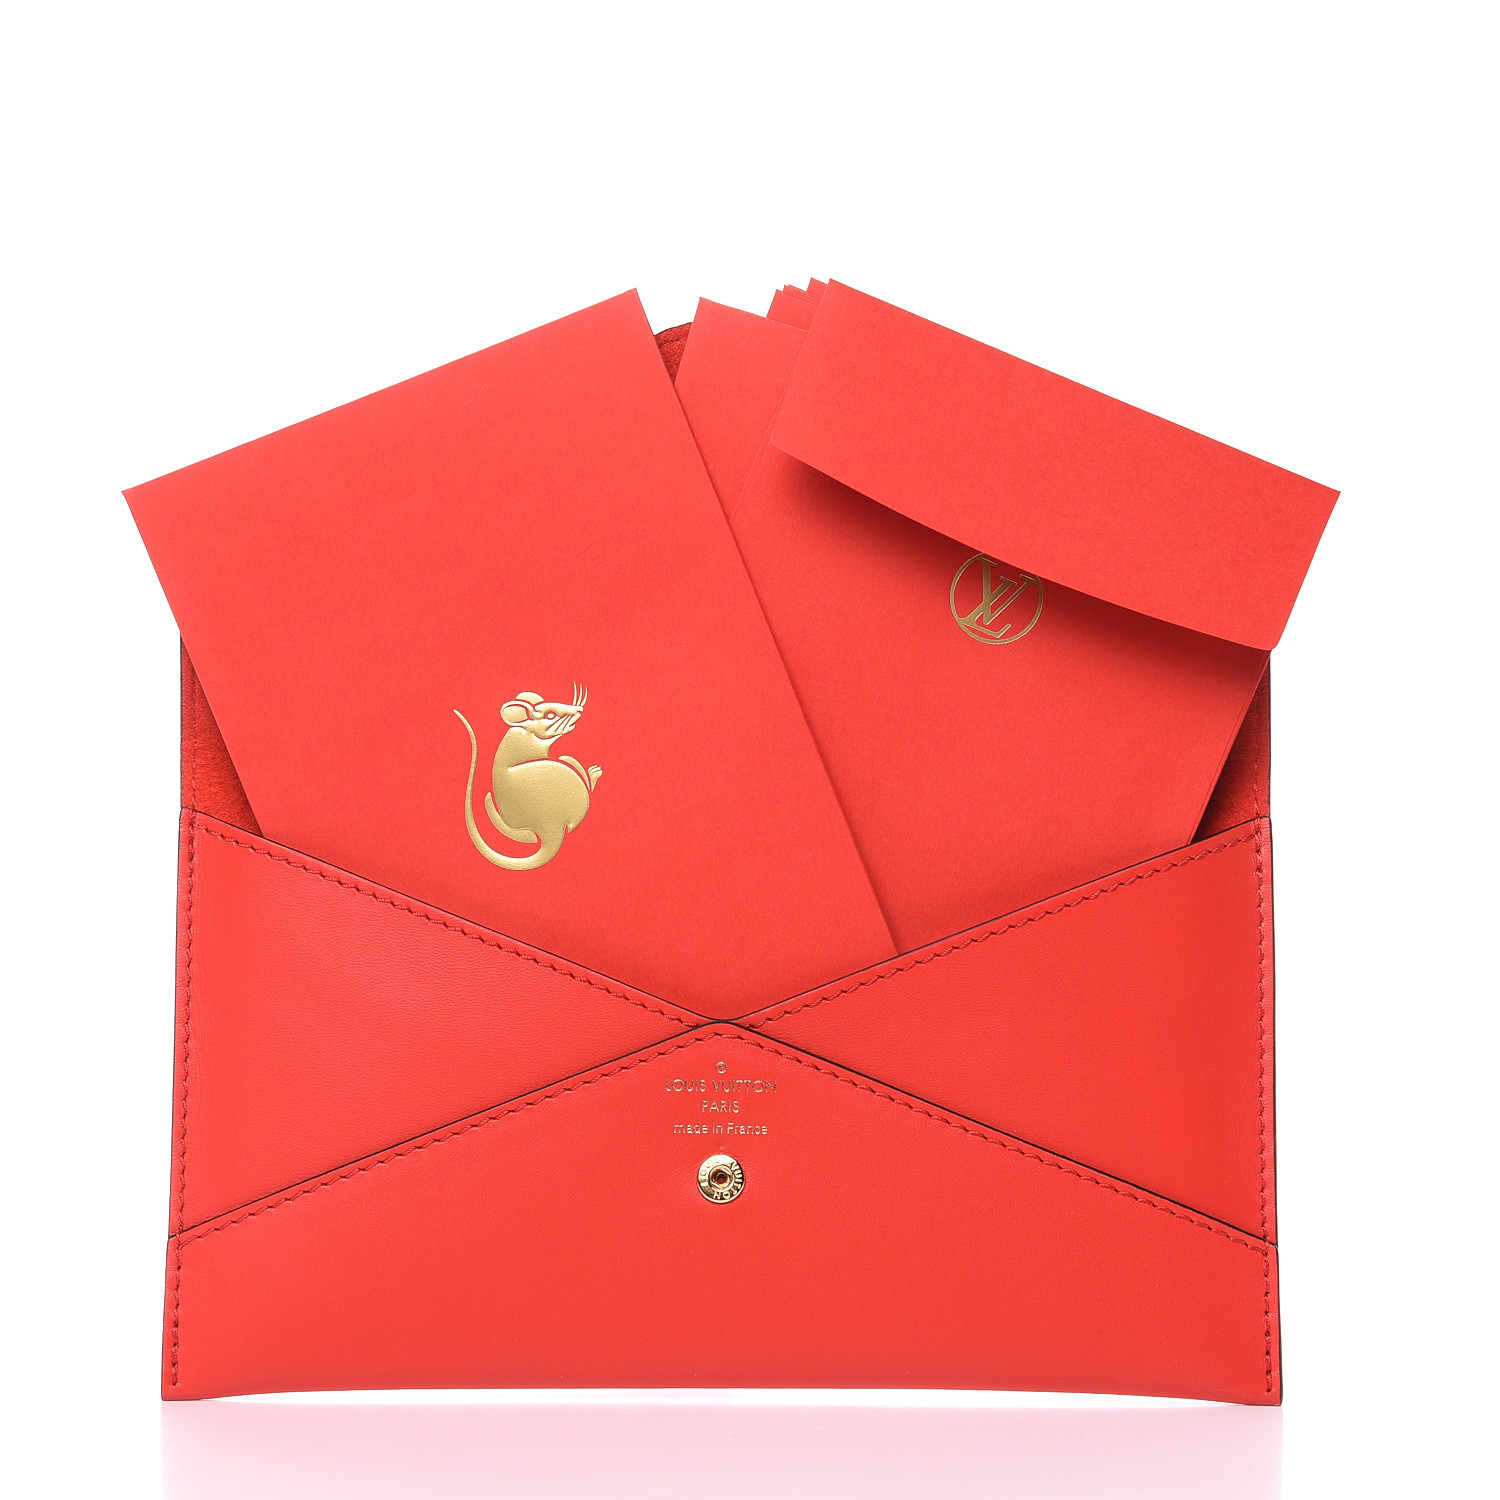 Anyone remember when LV used to give out leather red envelope containing red  envelopes for Chinese New Year? : r/Louisvuitton